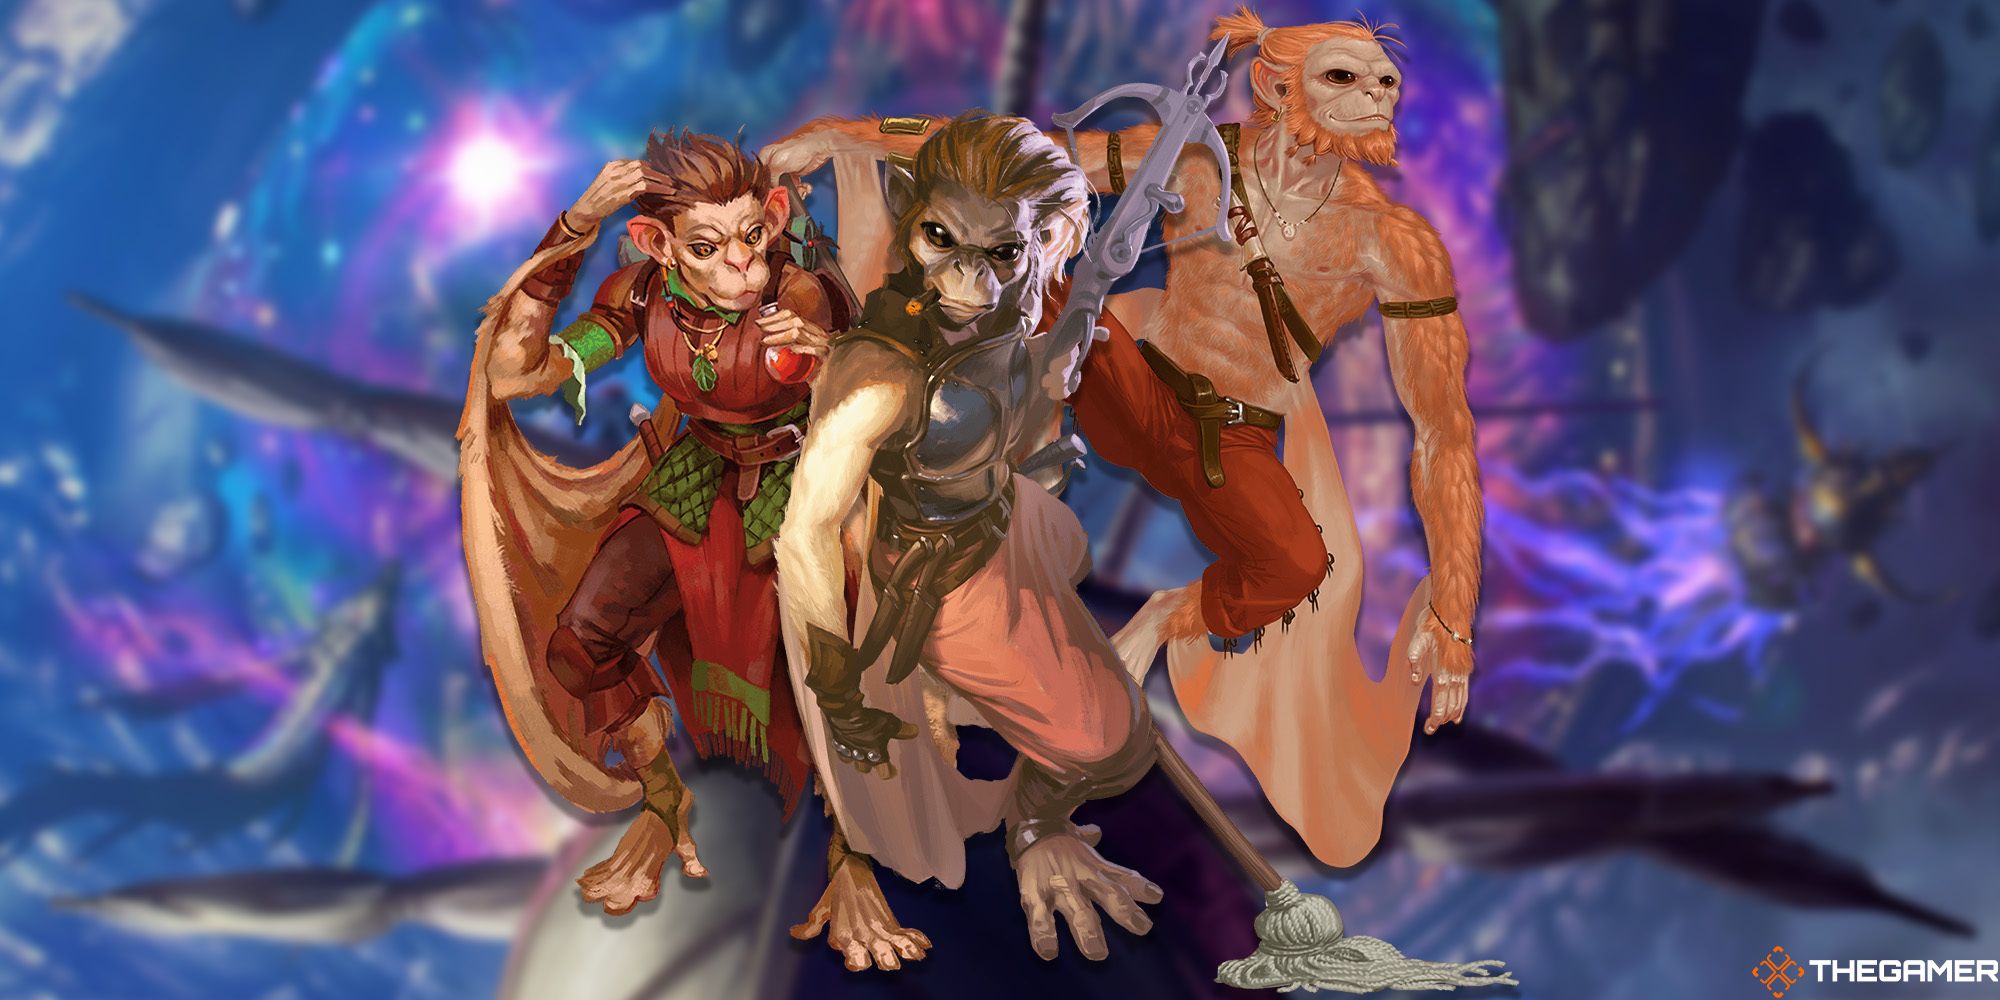 Image showing three different members of the Hadozee race from the D&D Spelljammer setting.